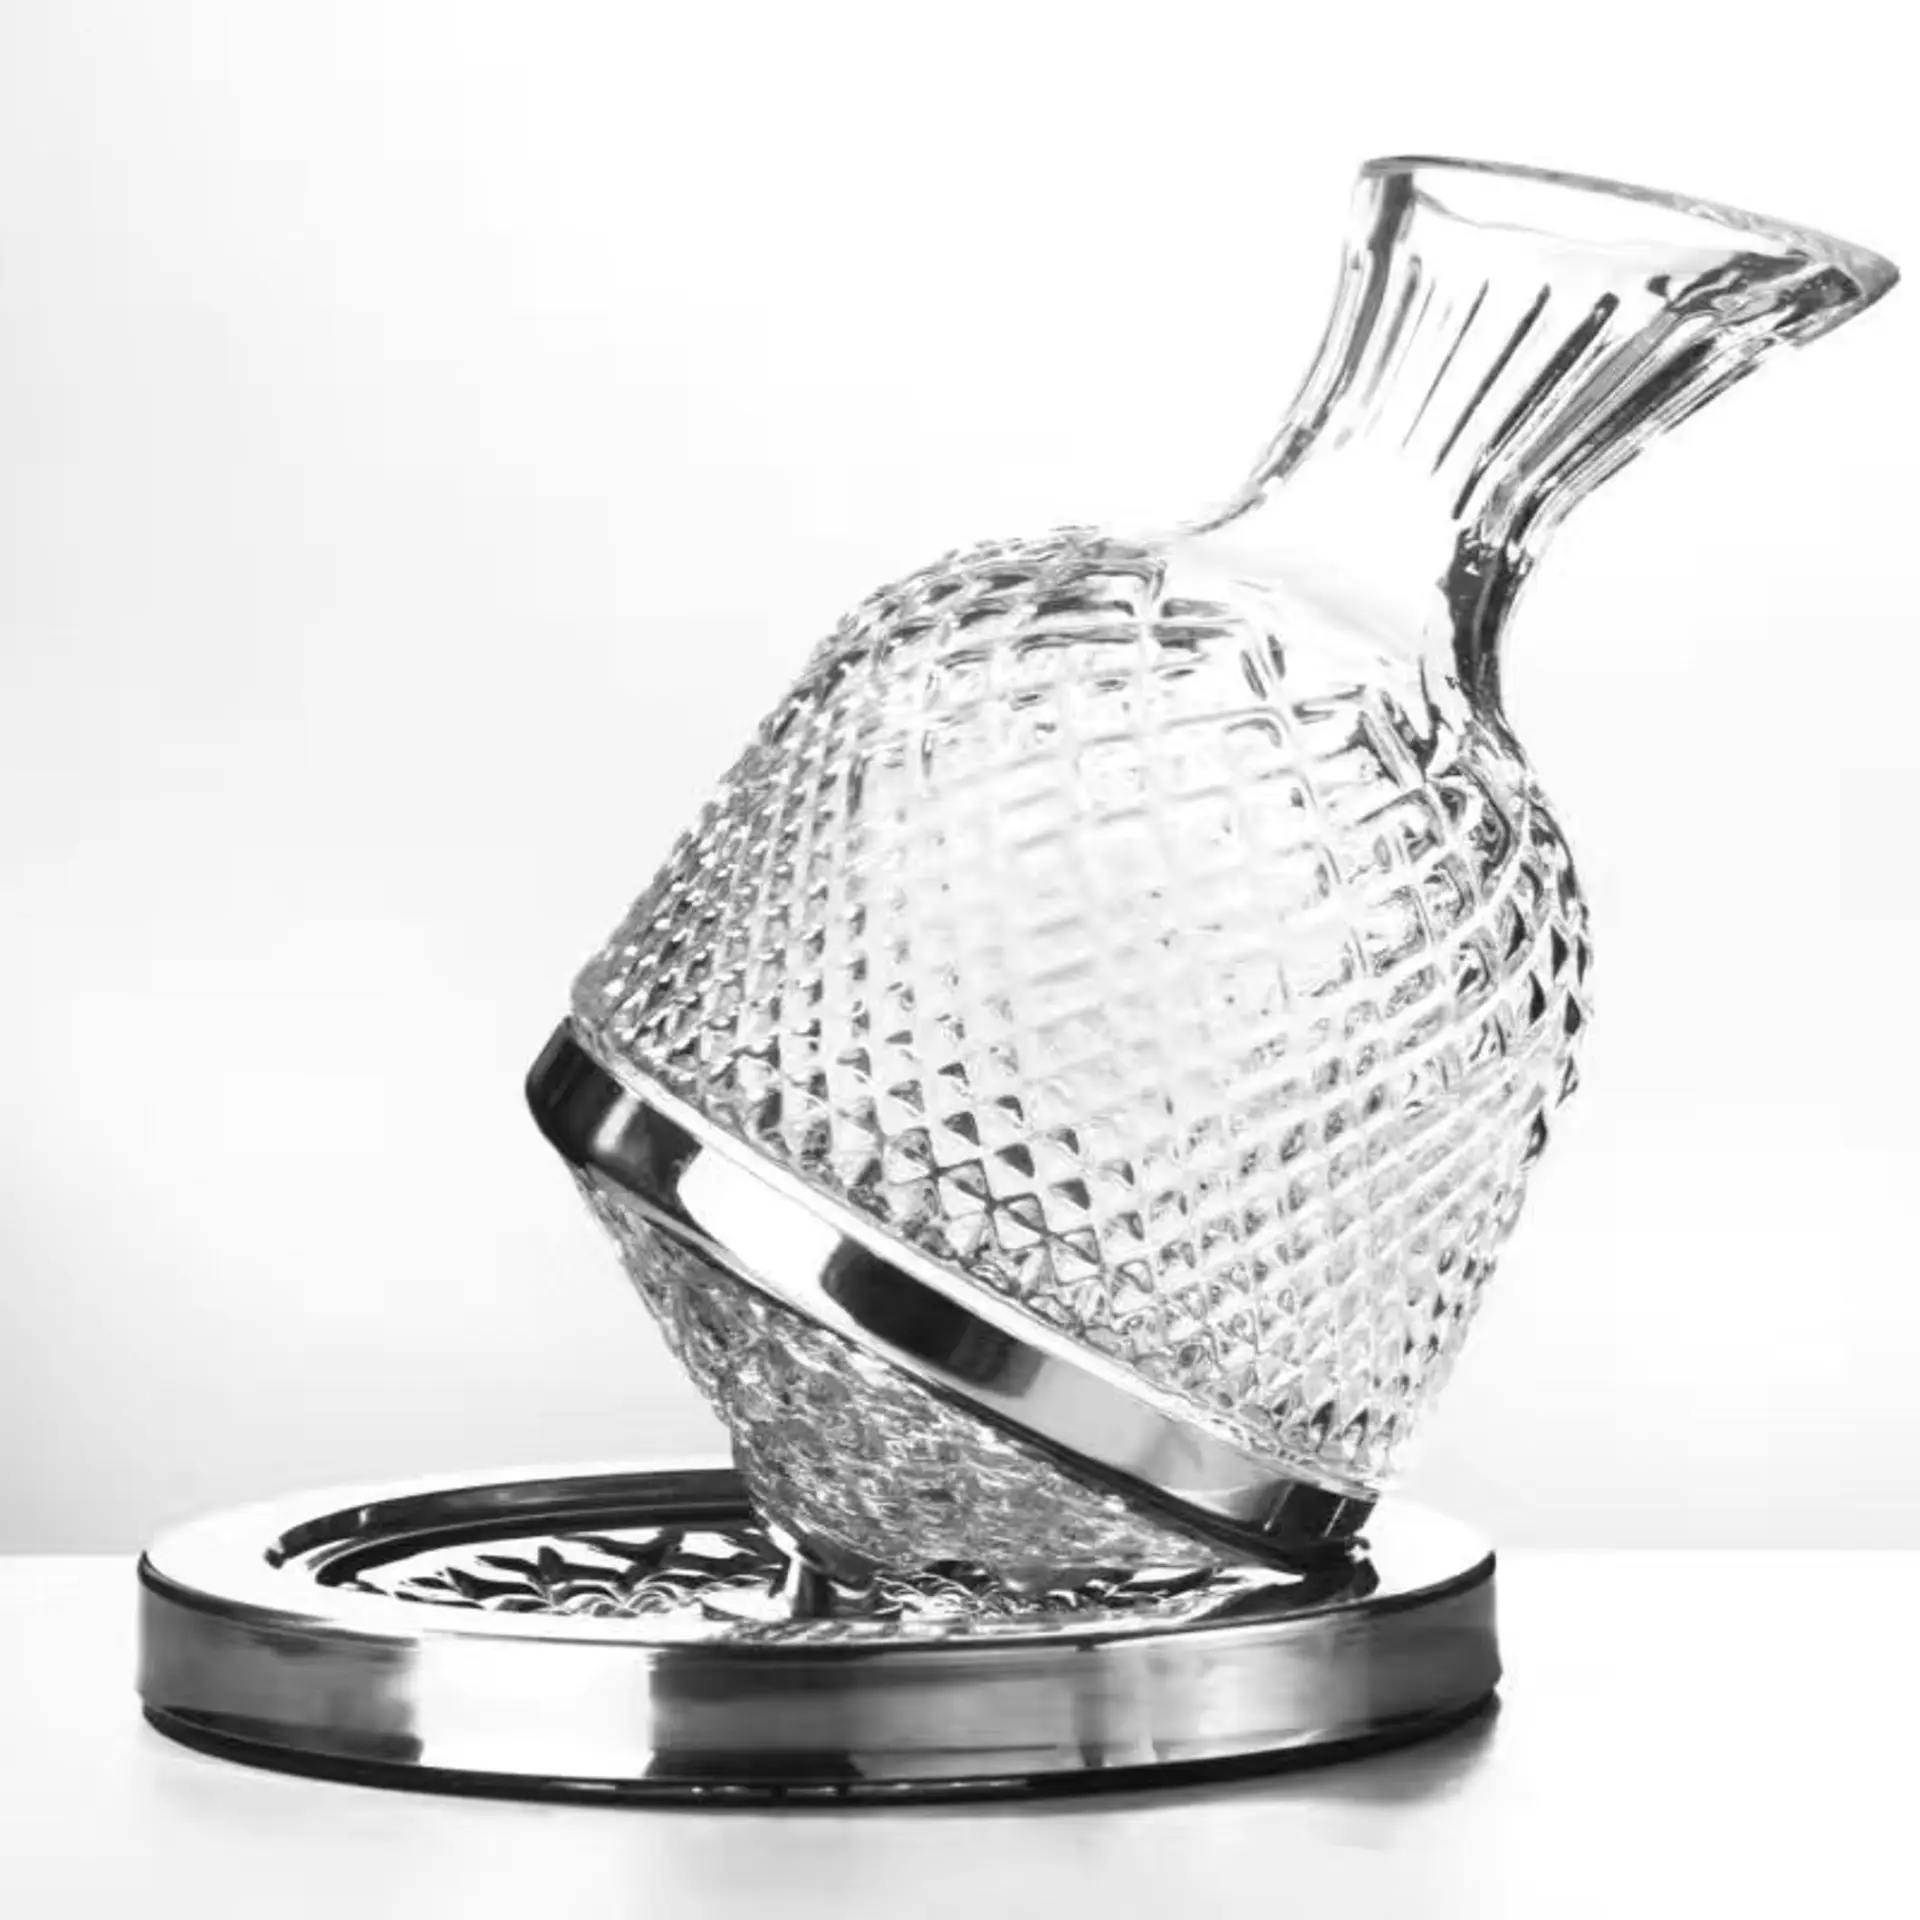 Decanter xoay 360